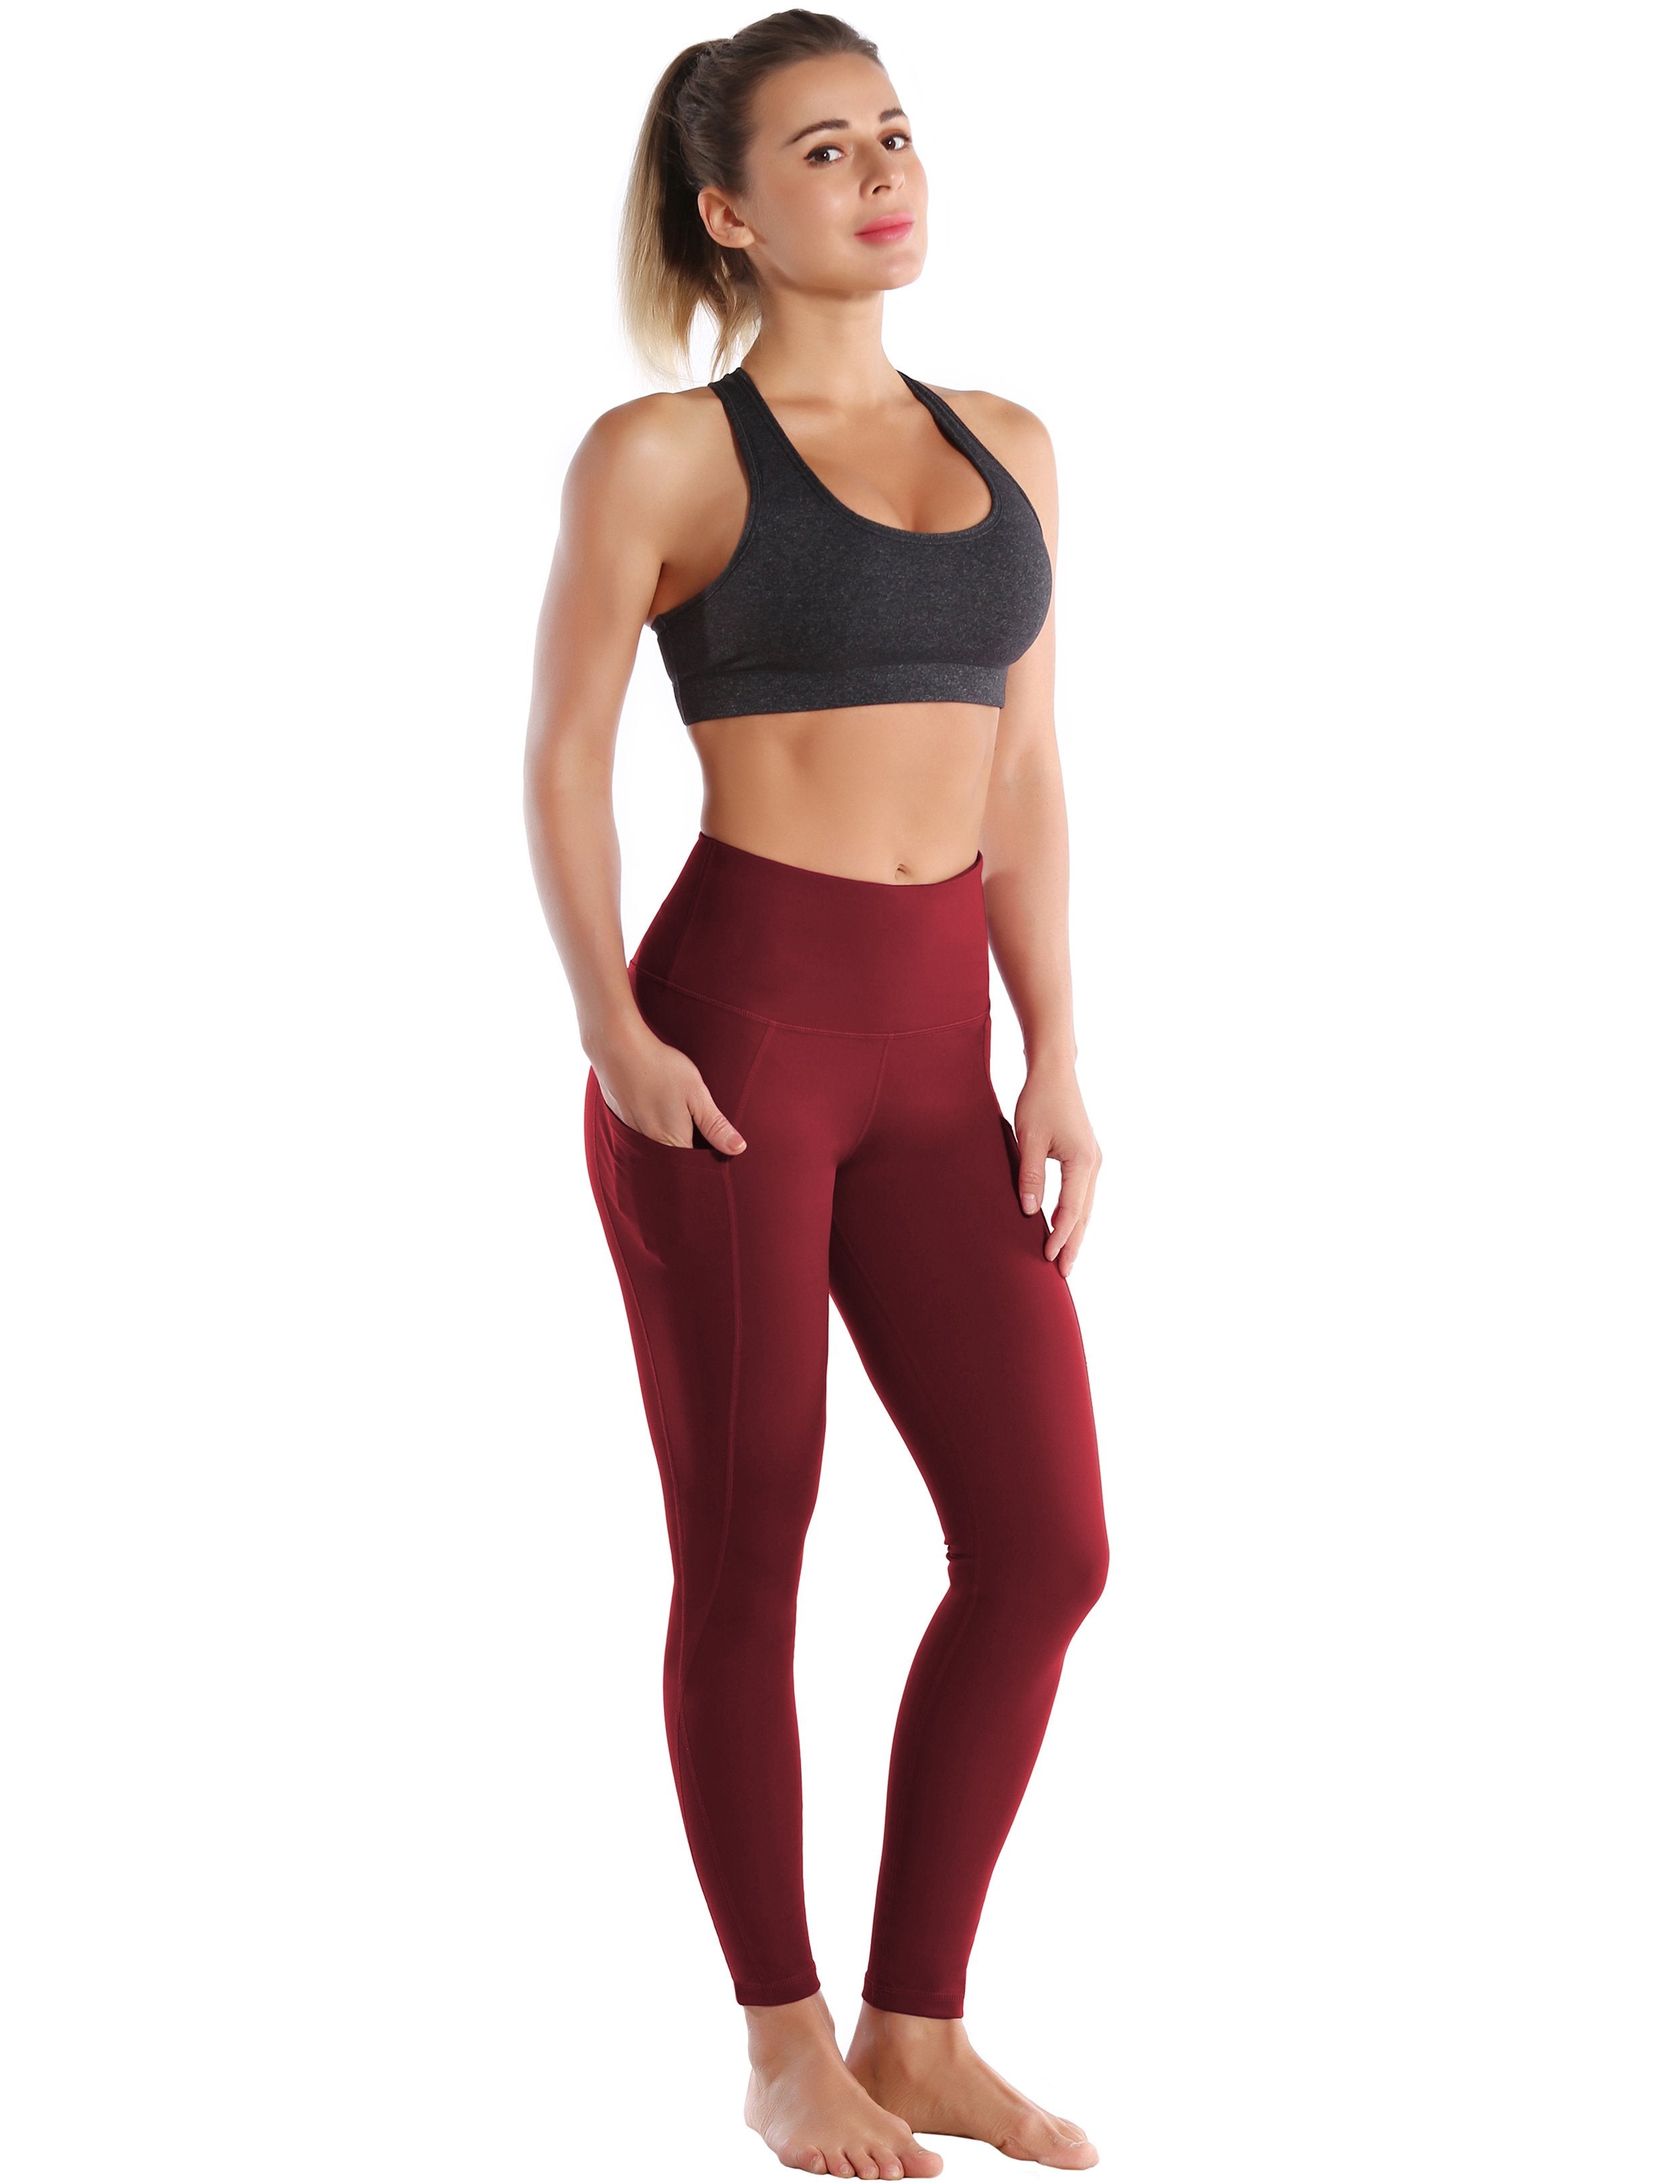 High Waist Side Pockets Gym Pants cherryred 75% Nylon, 25% Spandex Fabric doesn't attract lint easily 4-way stretch No see-through Moisture-wicking Tummy control Inner pocket